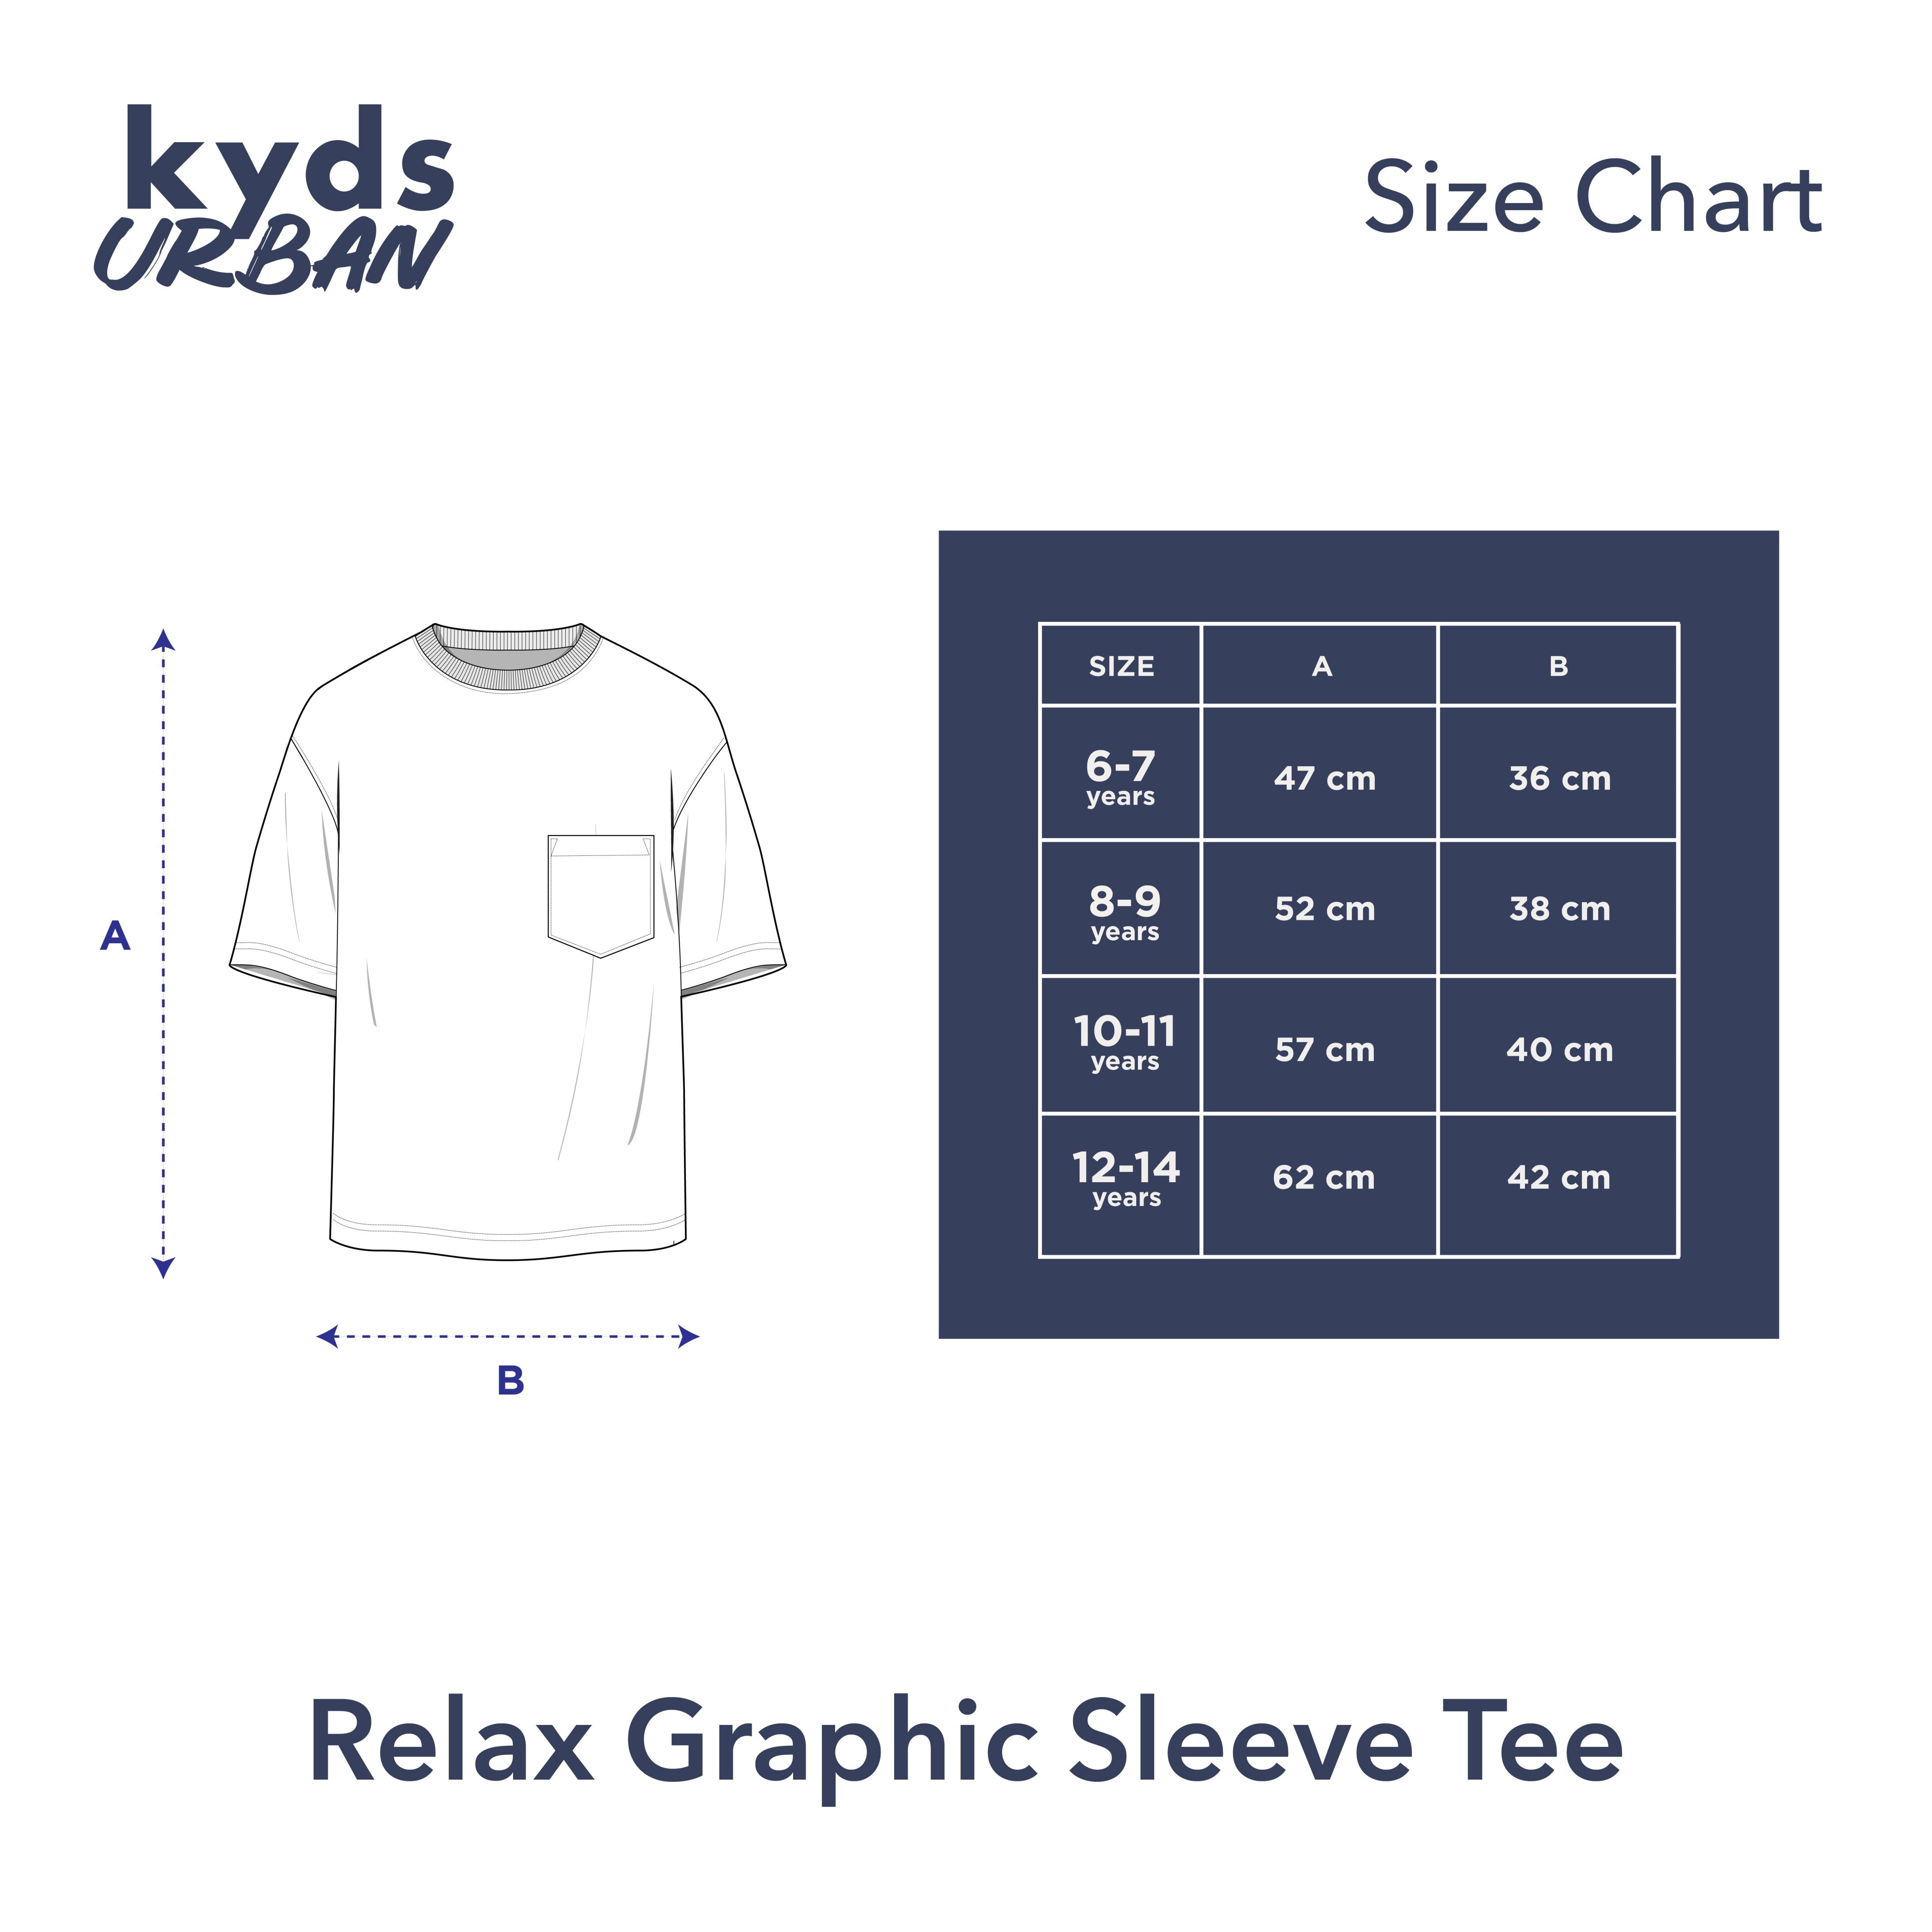 Relax Graphic Sleeve Tee